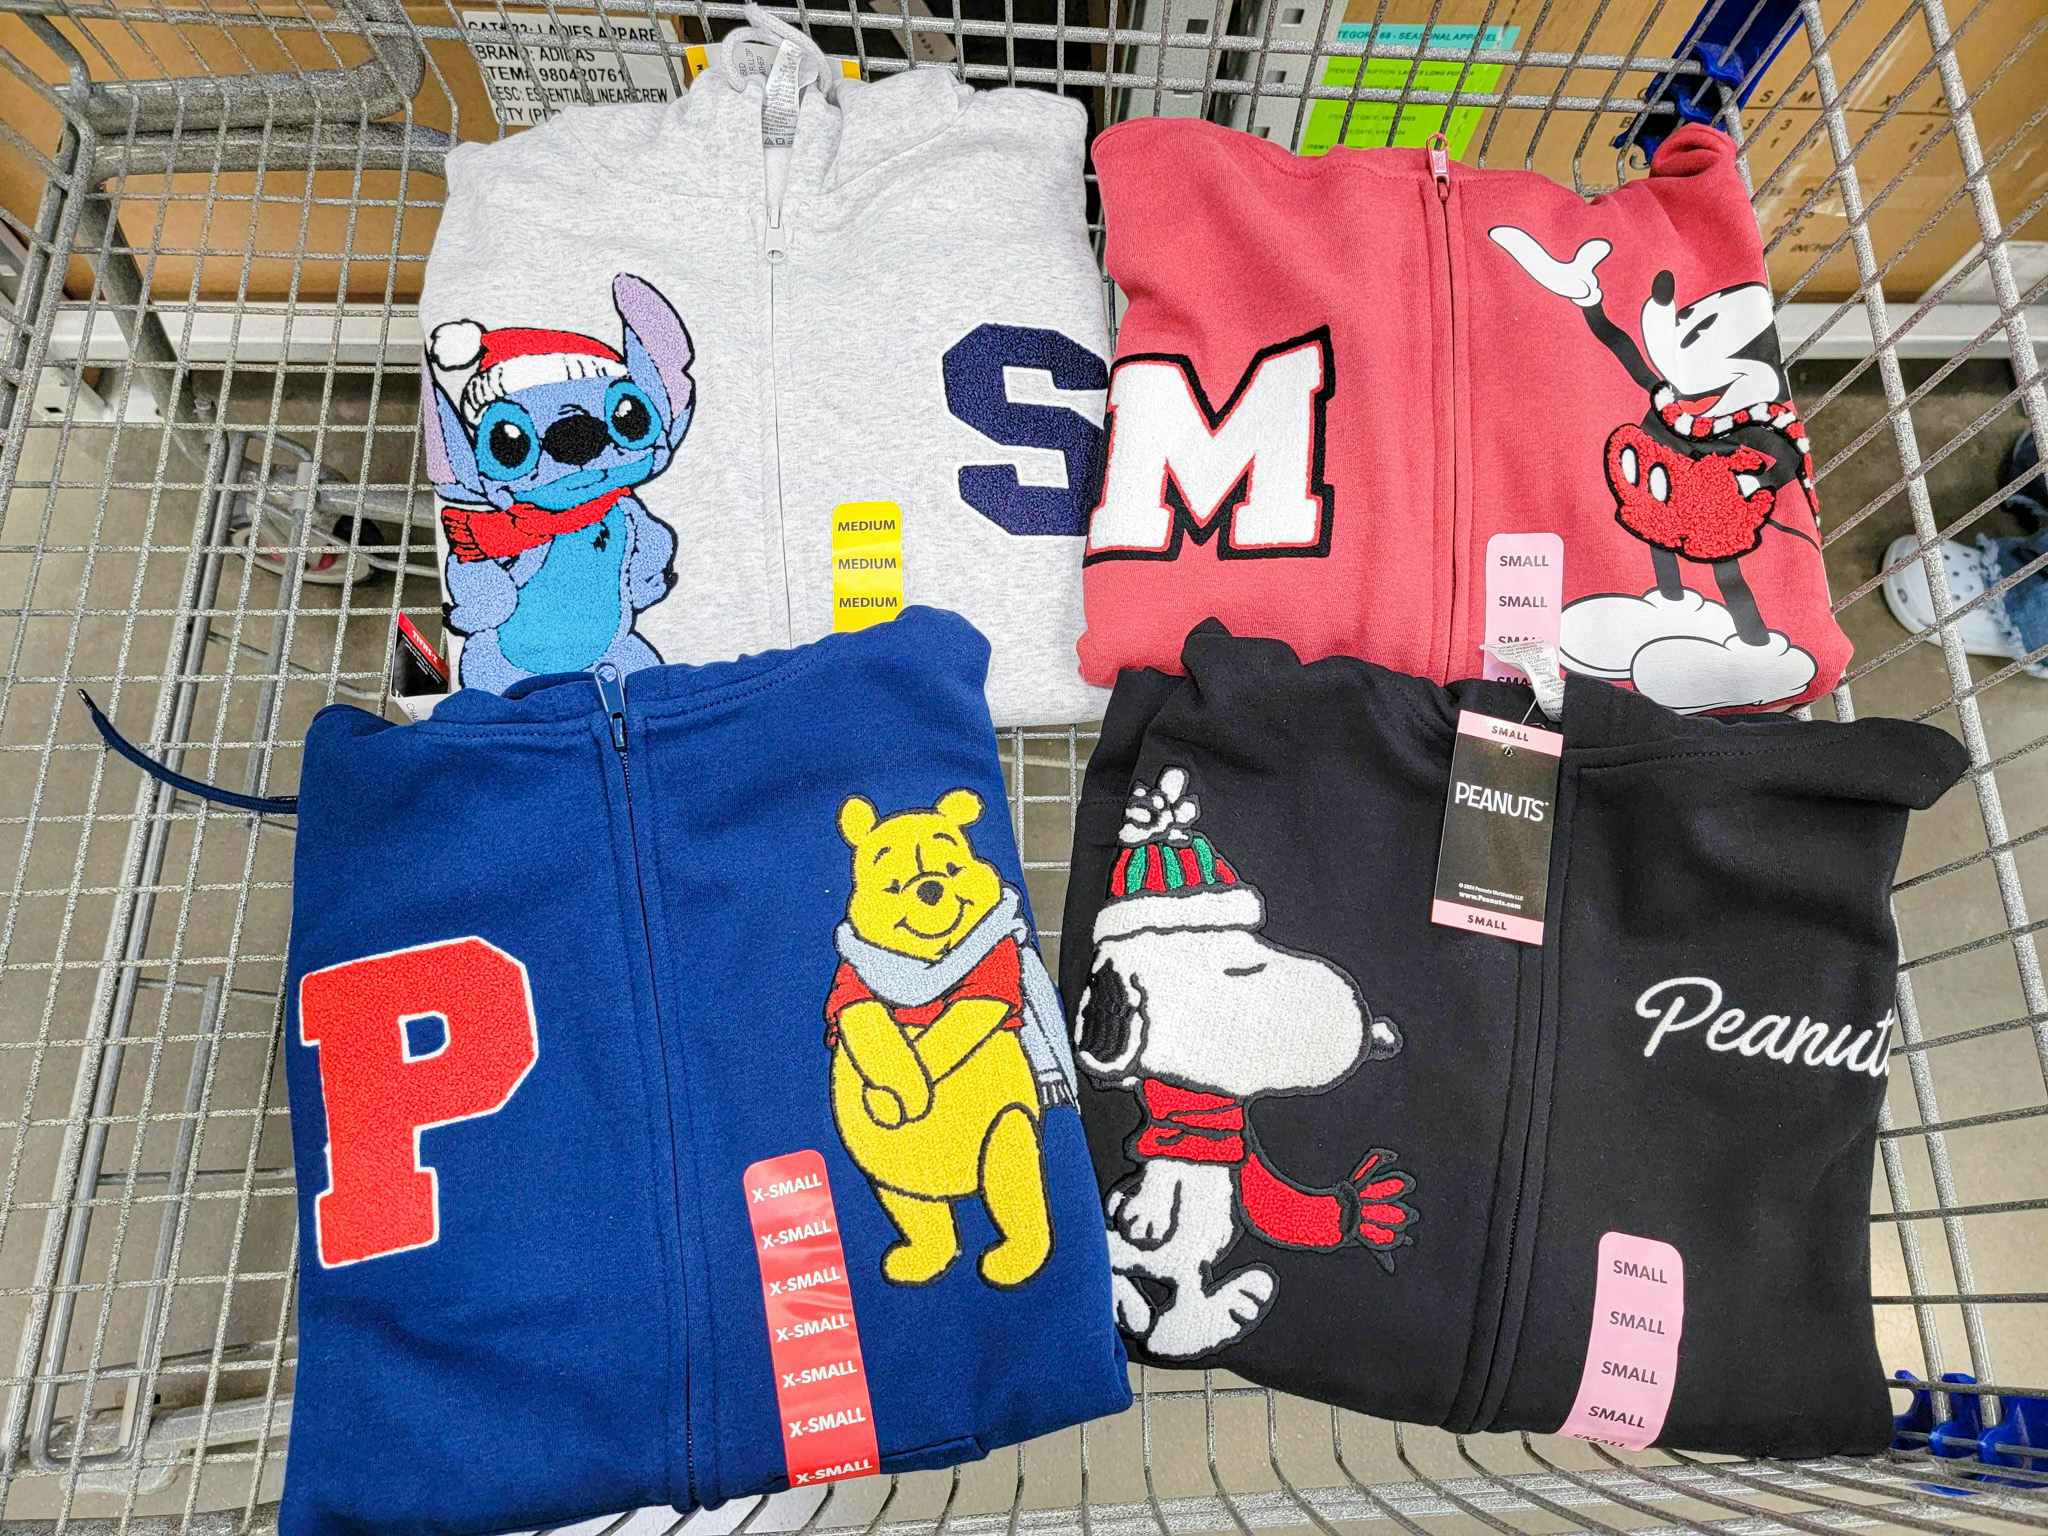 stitch, mickey, pooh, and peanuts hoodies in a cart